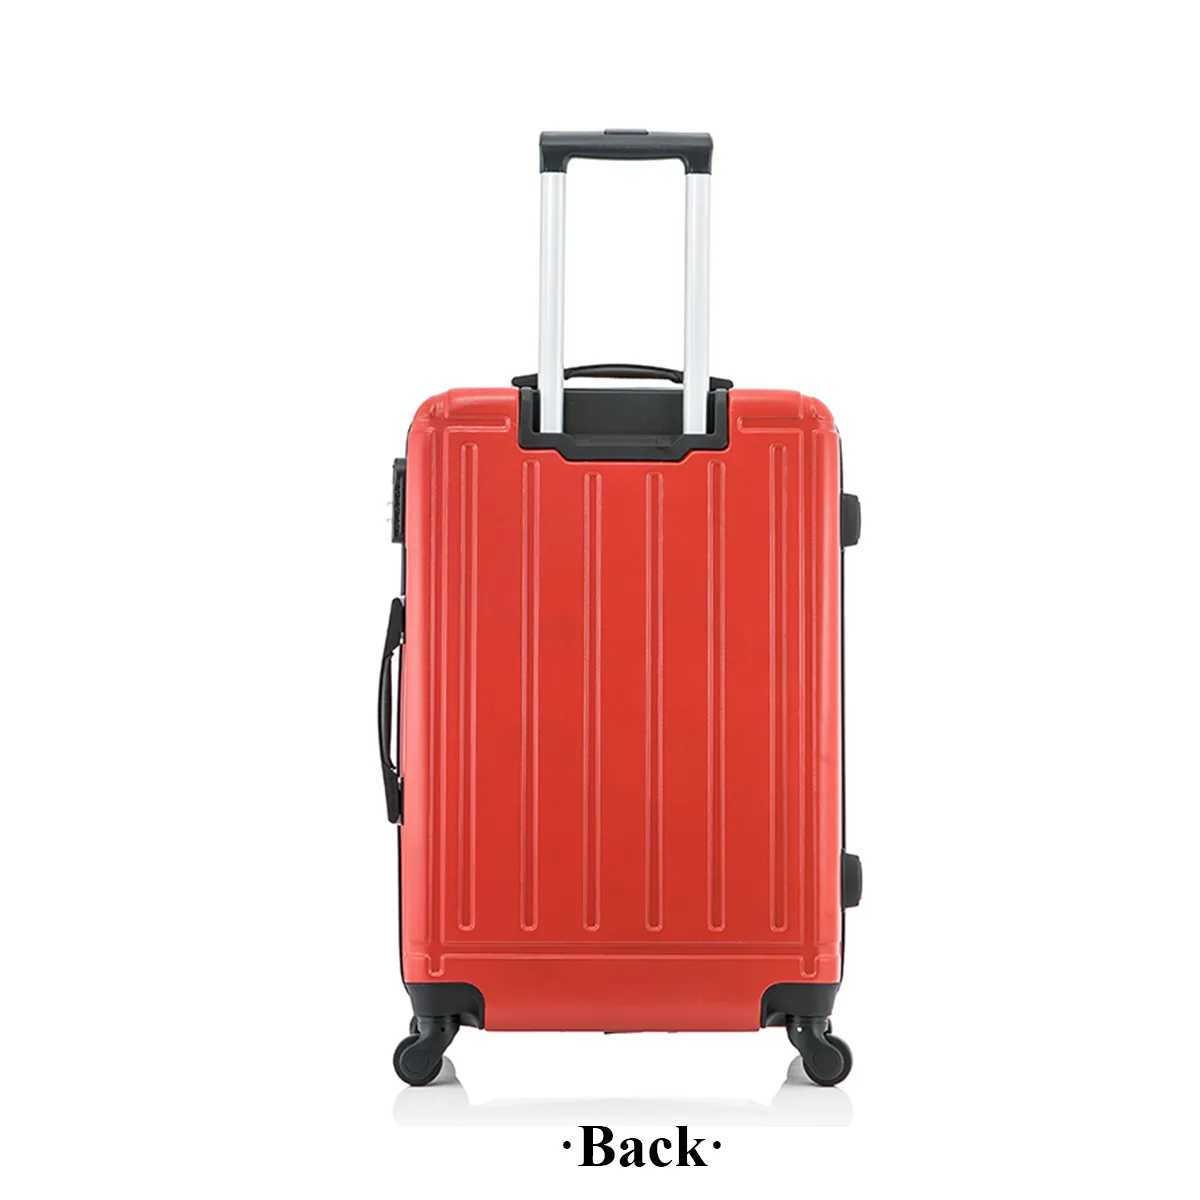 HIGH QUALITY LIGHTWEIGHT GOOD DESIGN ABS  HARD CASE SUITCASE LUGGAGE